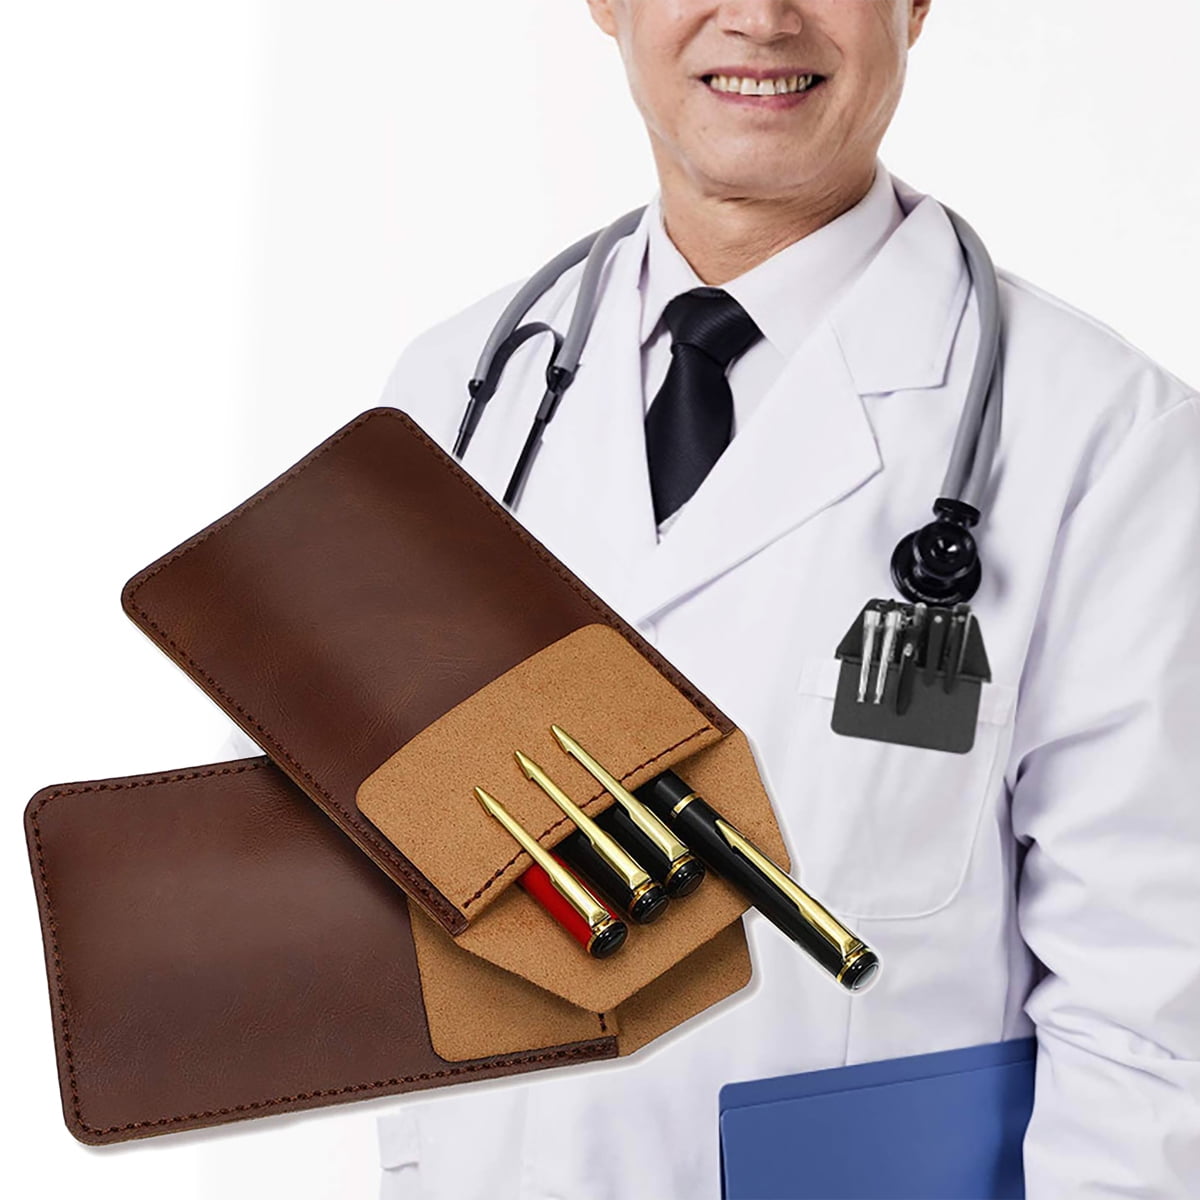 New Leather Pen Pouch Holder Organizer for Shirts Lab Coat.. Pocket Protector 